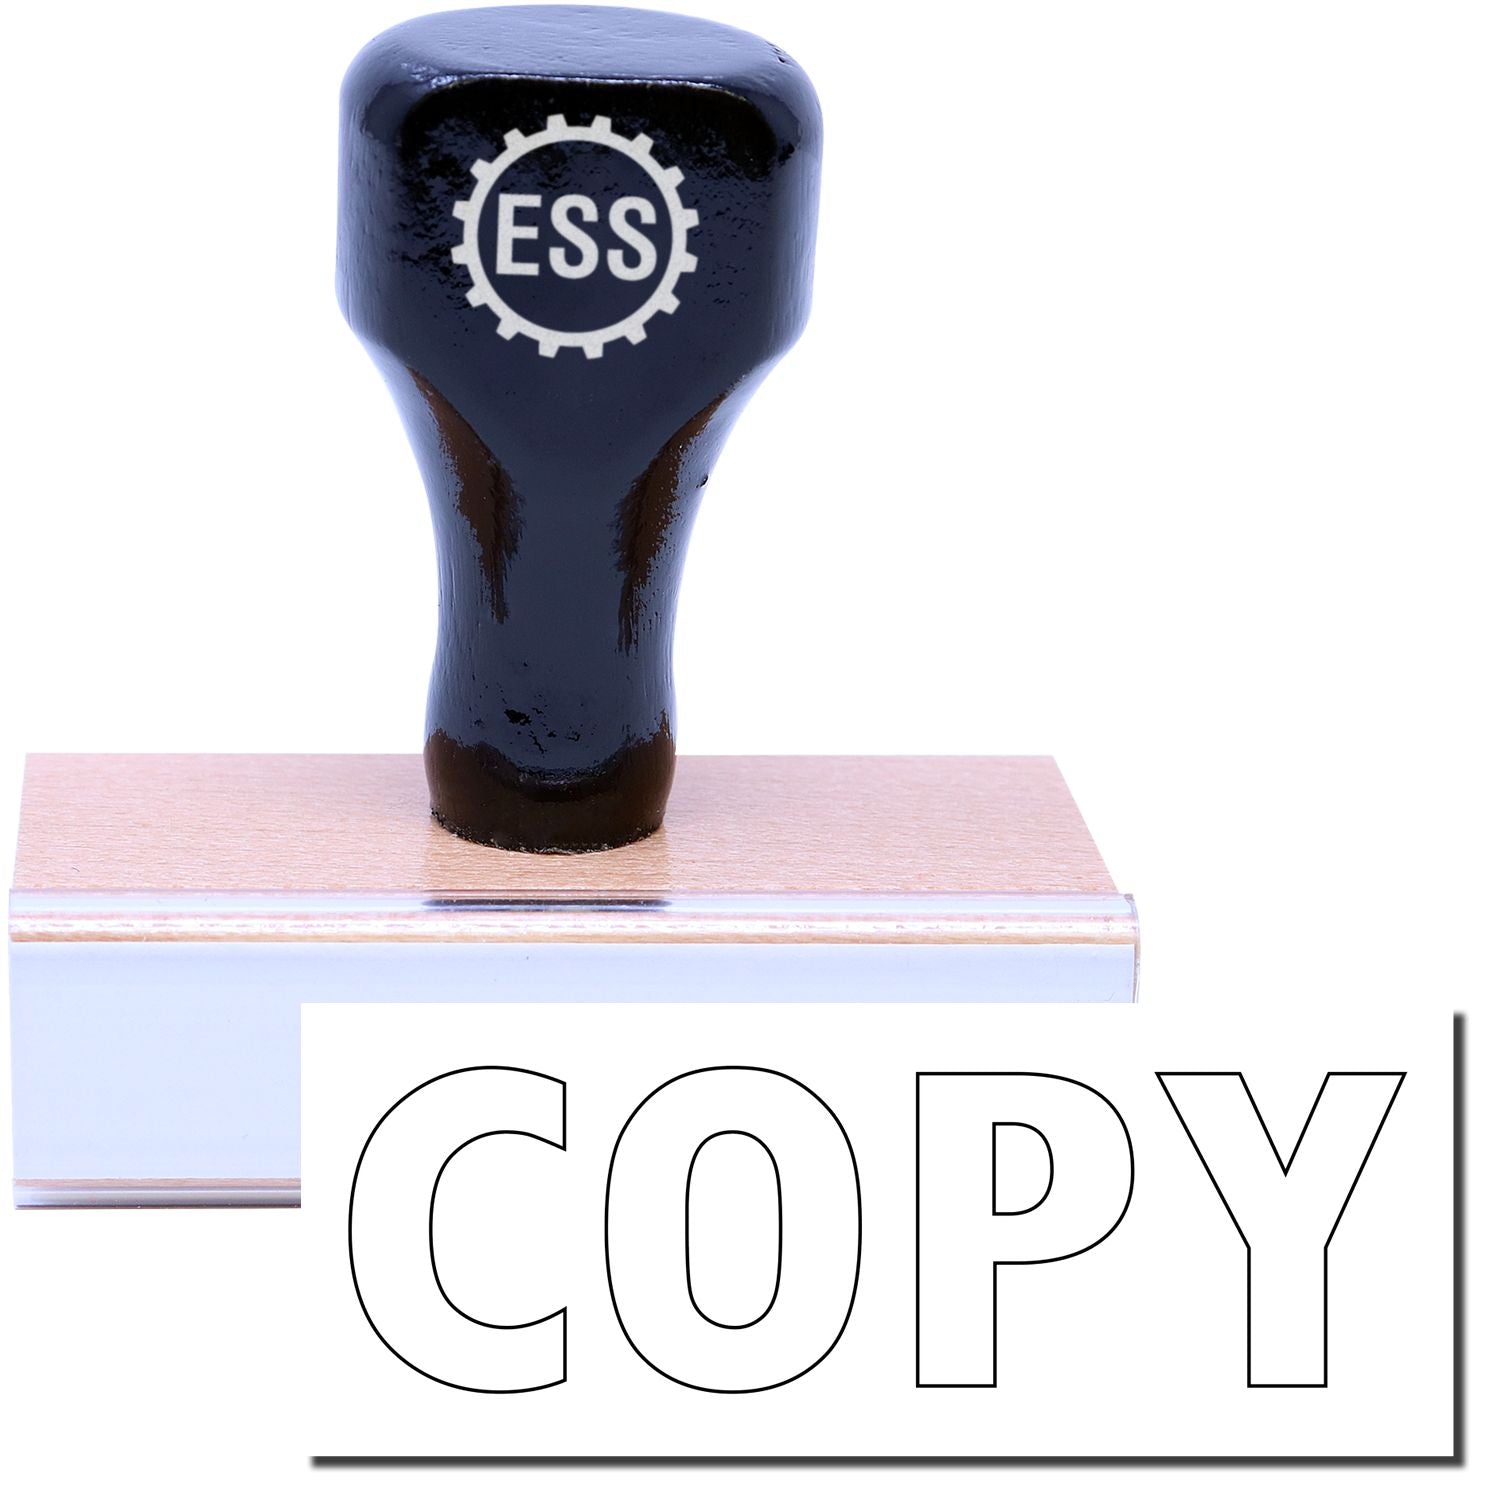 A stock office rubber stamp with a stamped image showing how the text "COPY" in a large font and outline style is displayed after stamping.